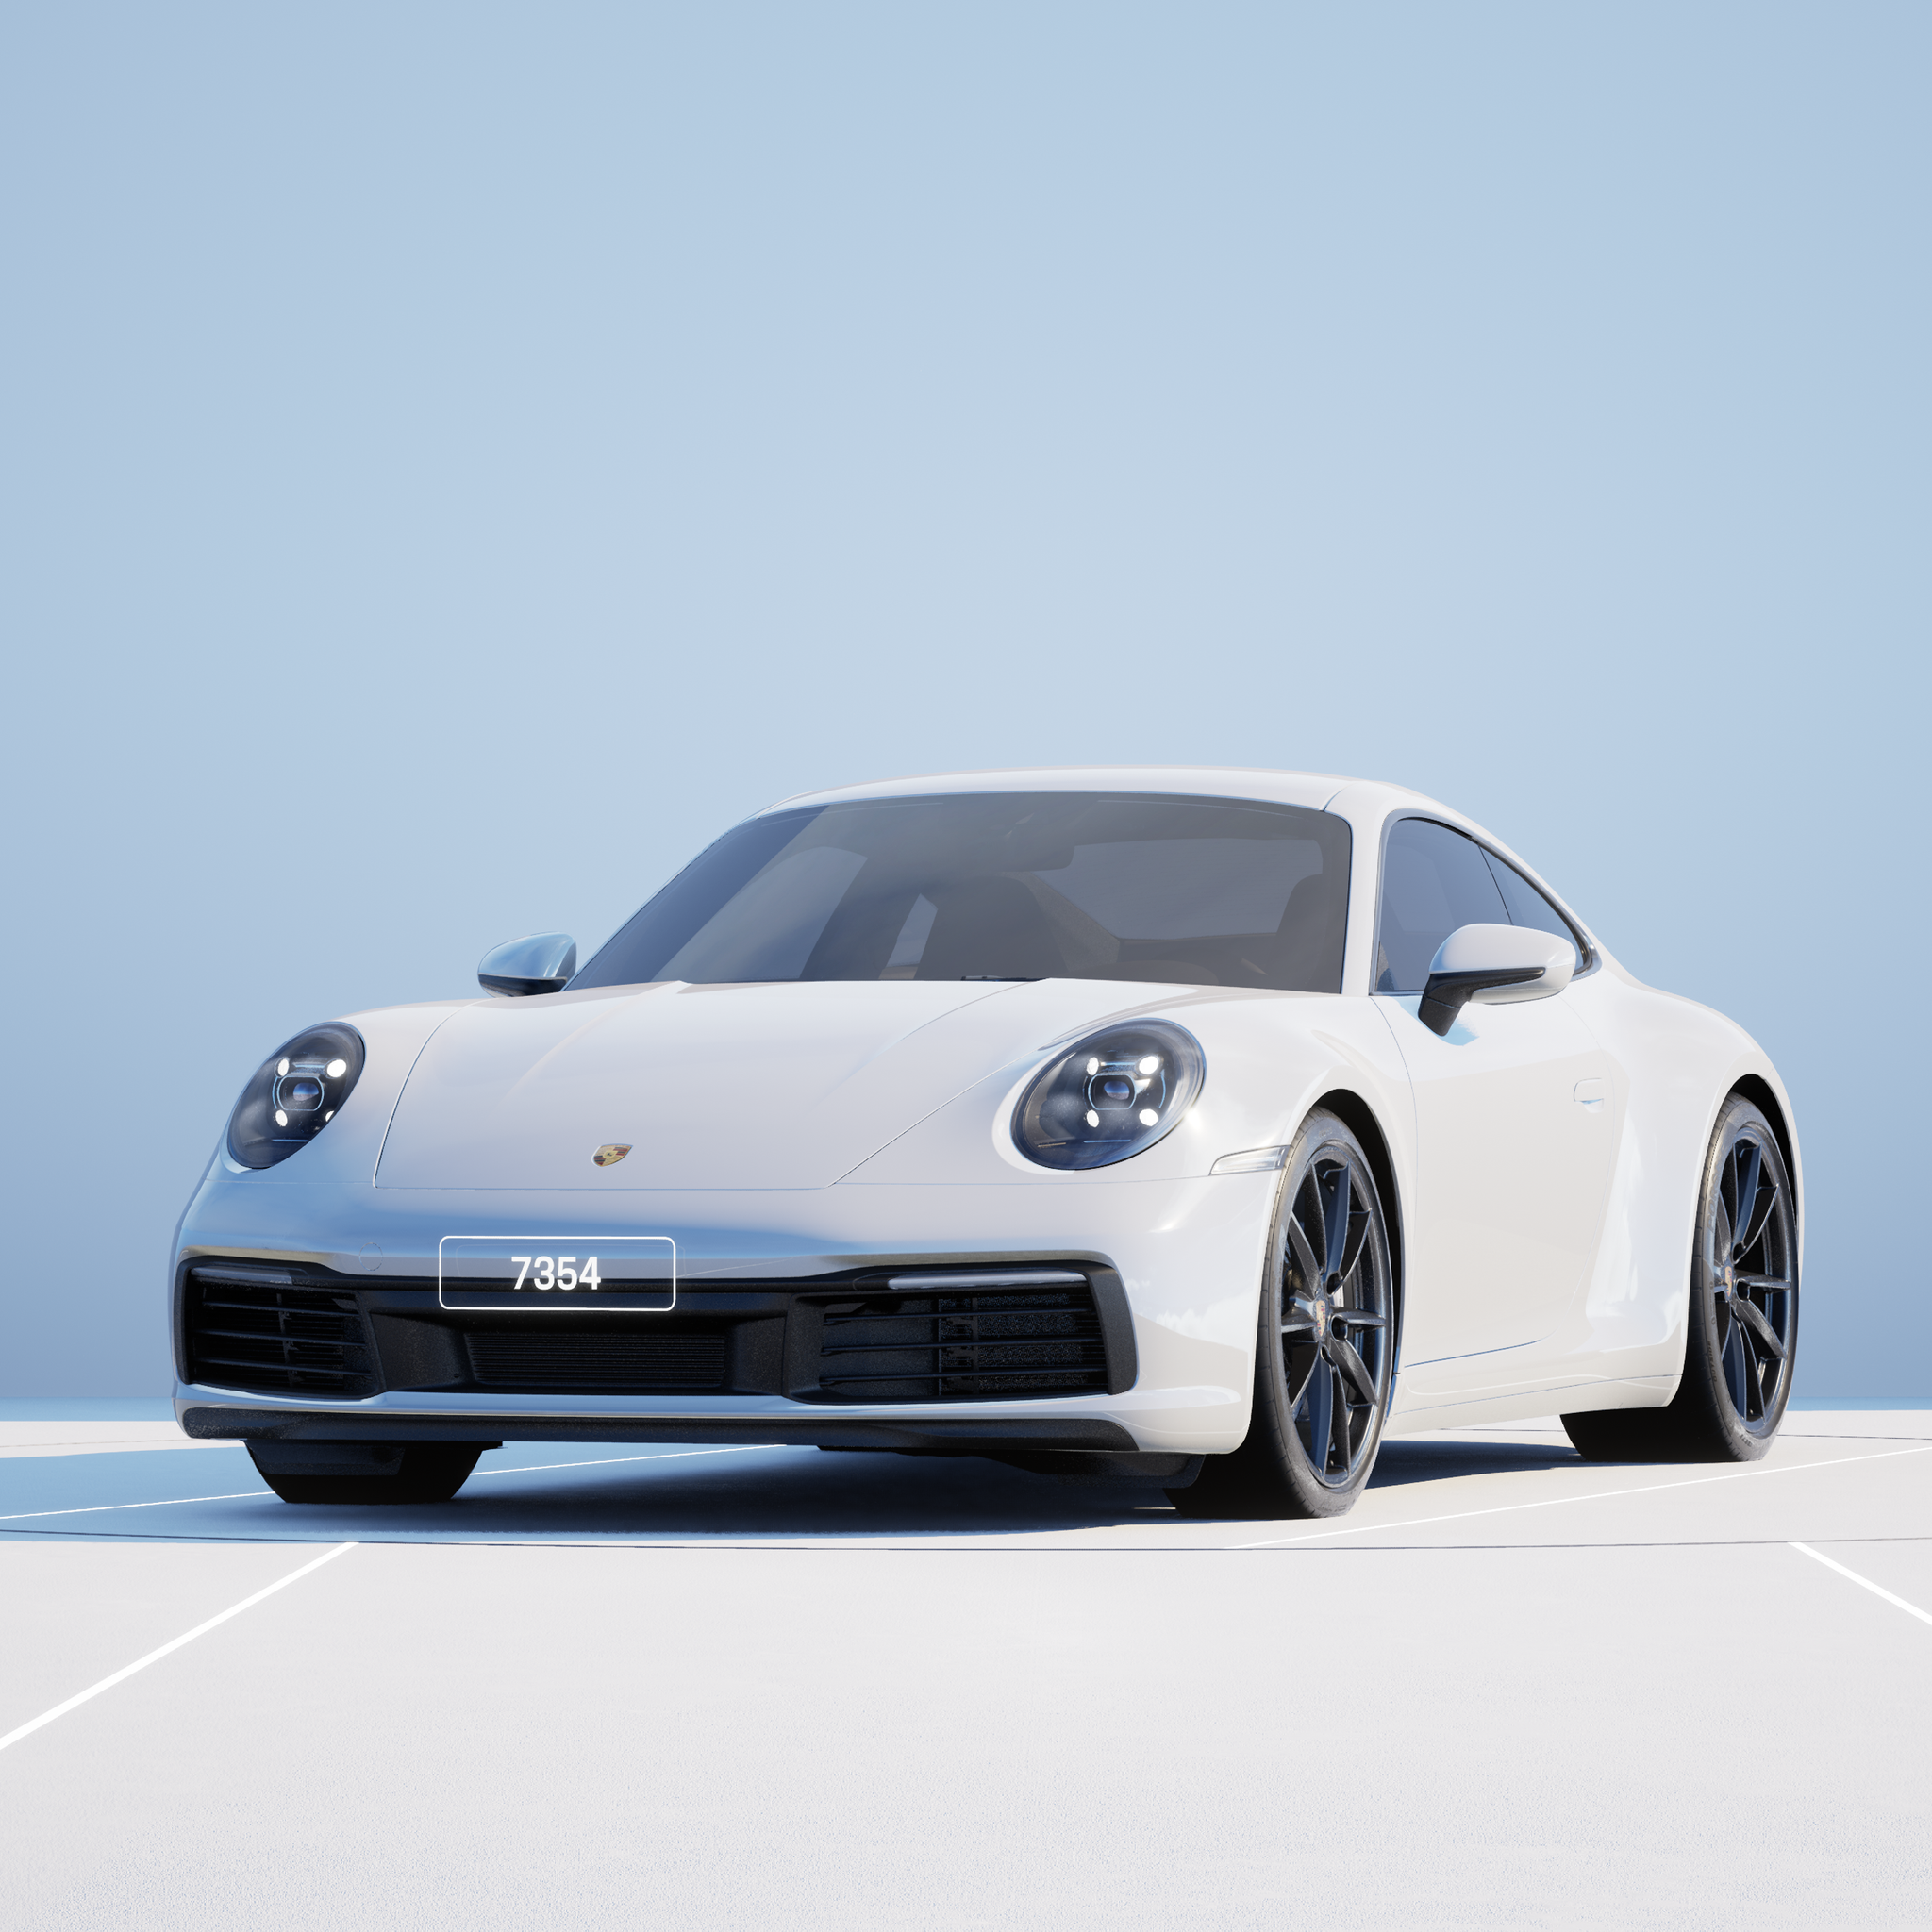 The PORSCHΞ 911 7354 image in phase